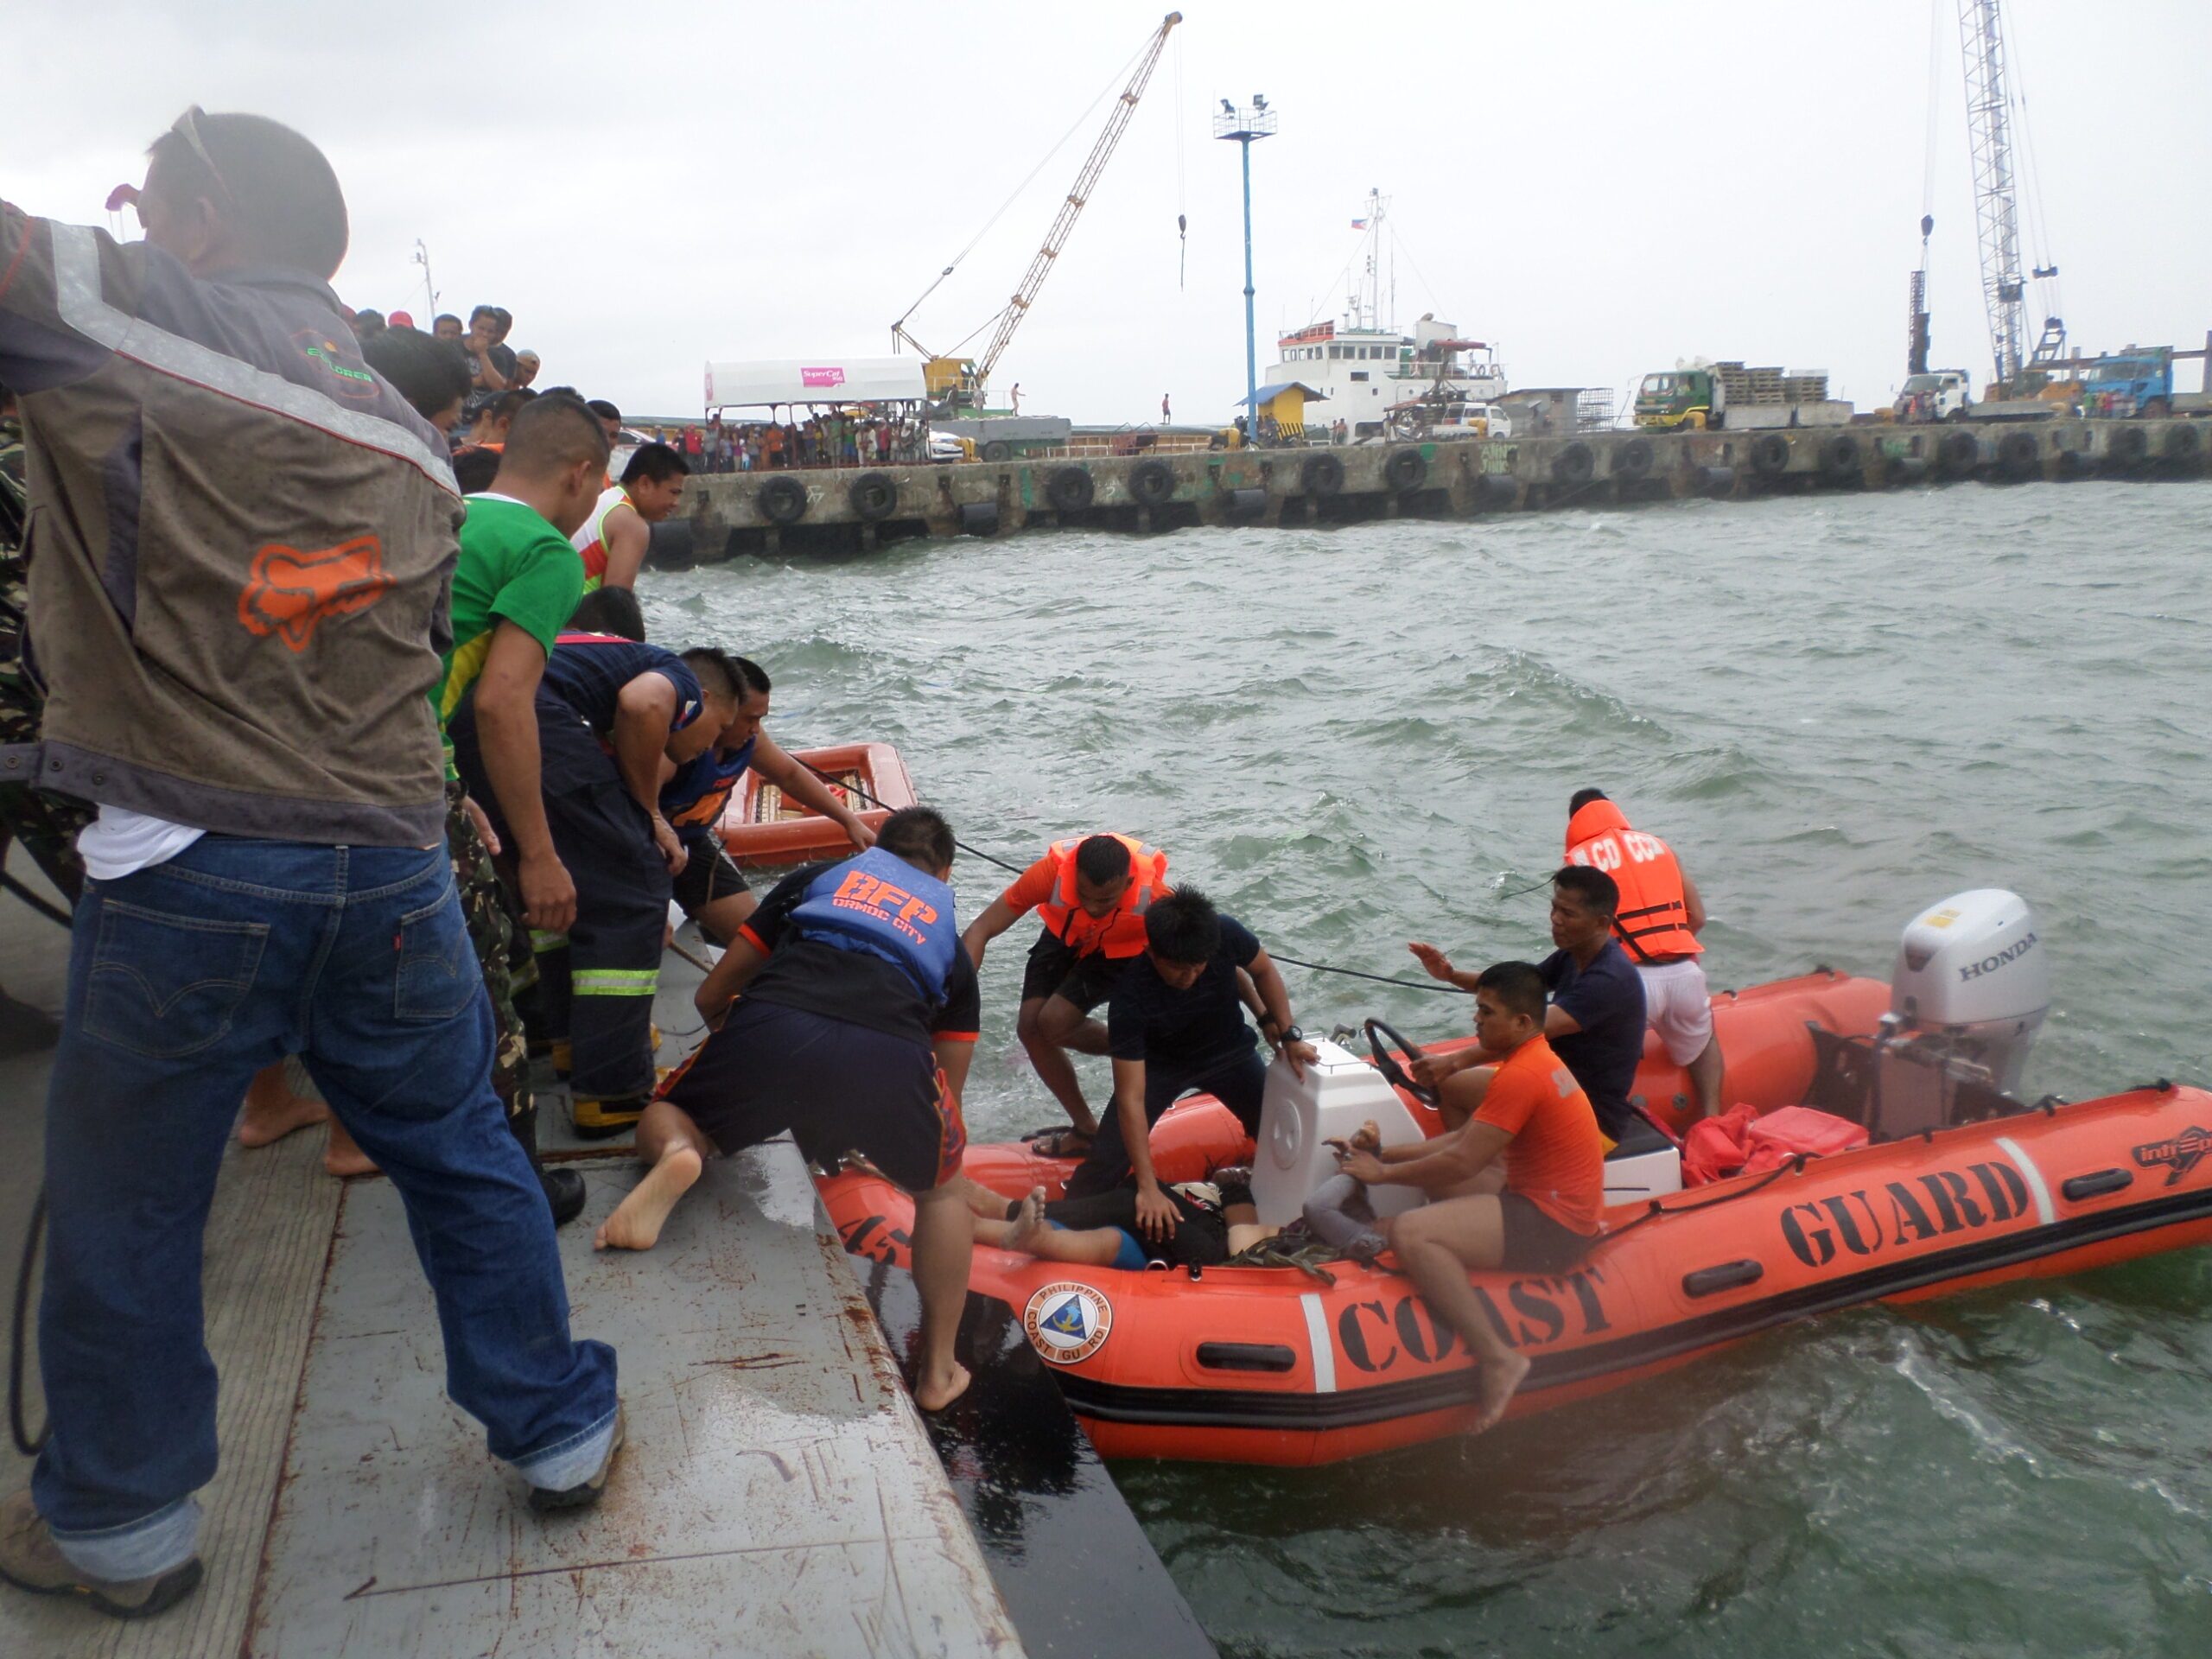 ‘Erratic maneuver’ one of causes of Ormoc boat tragedy